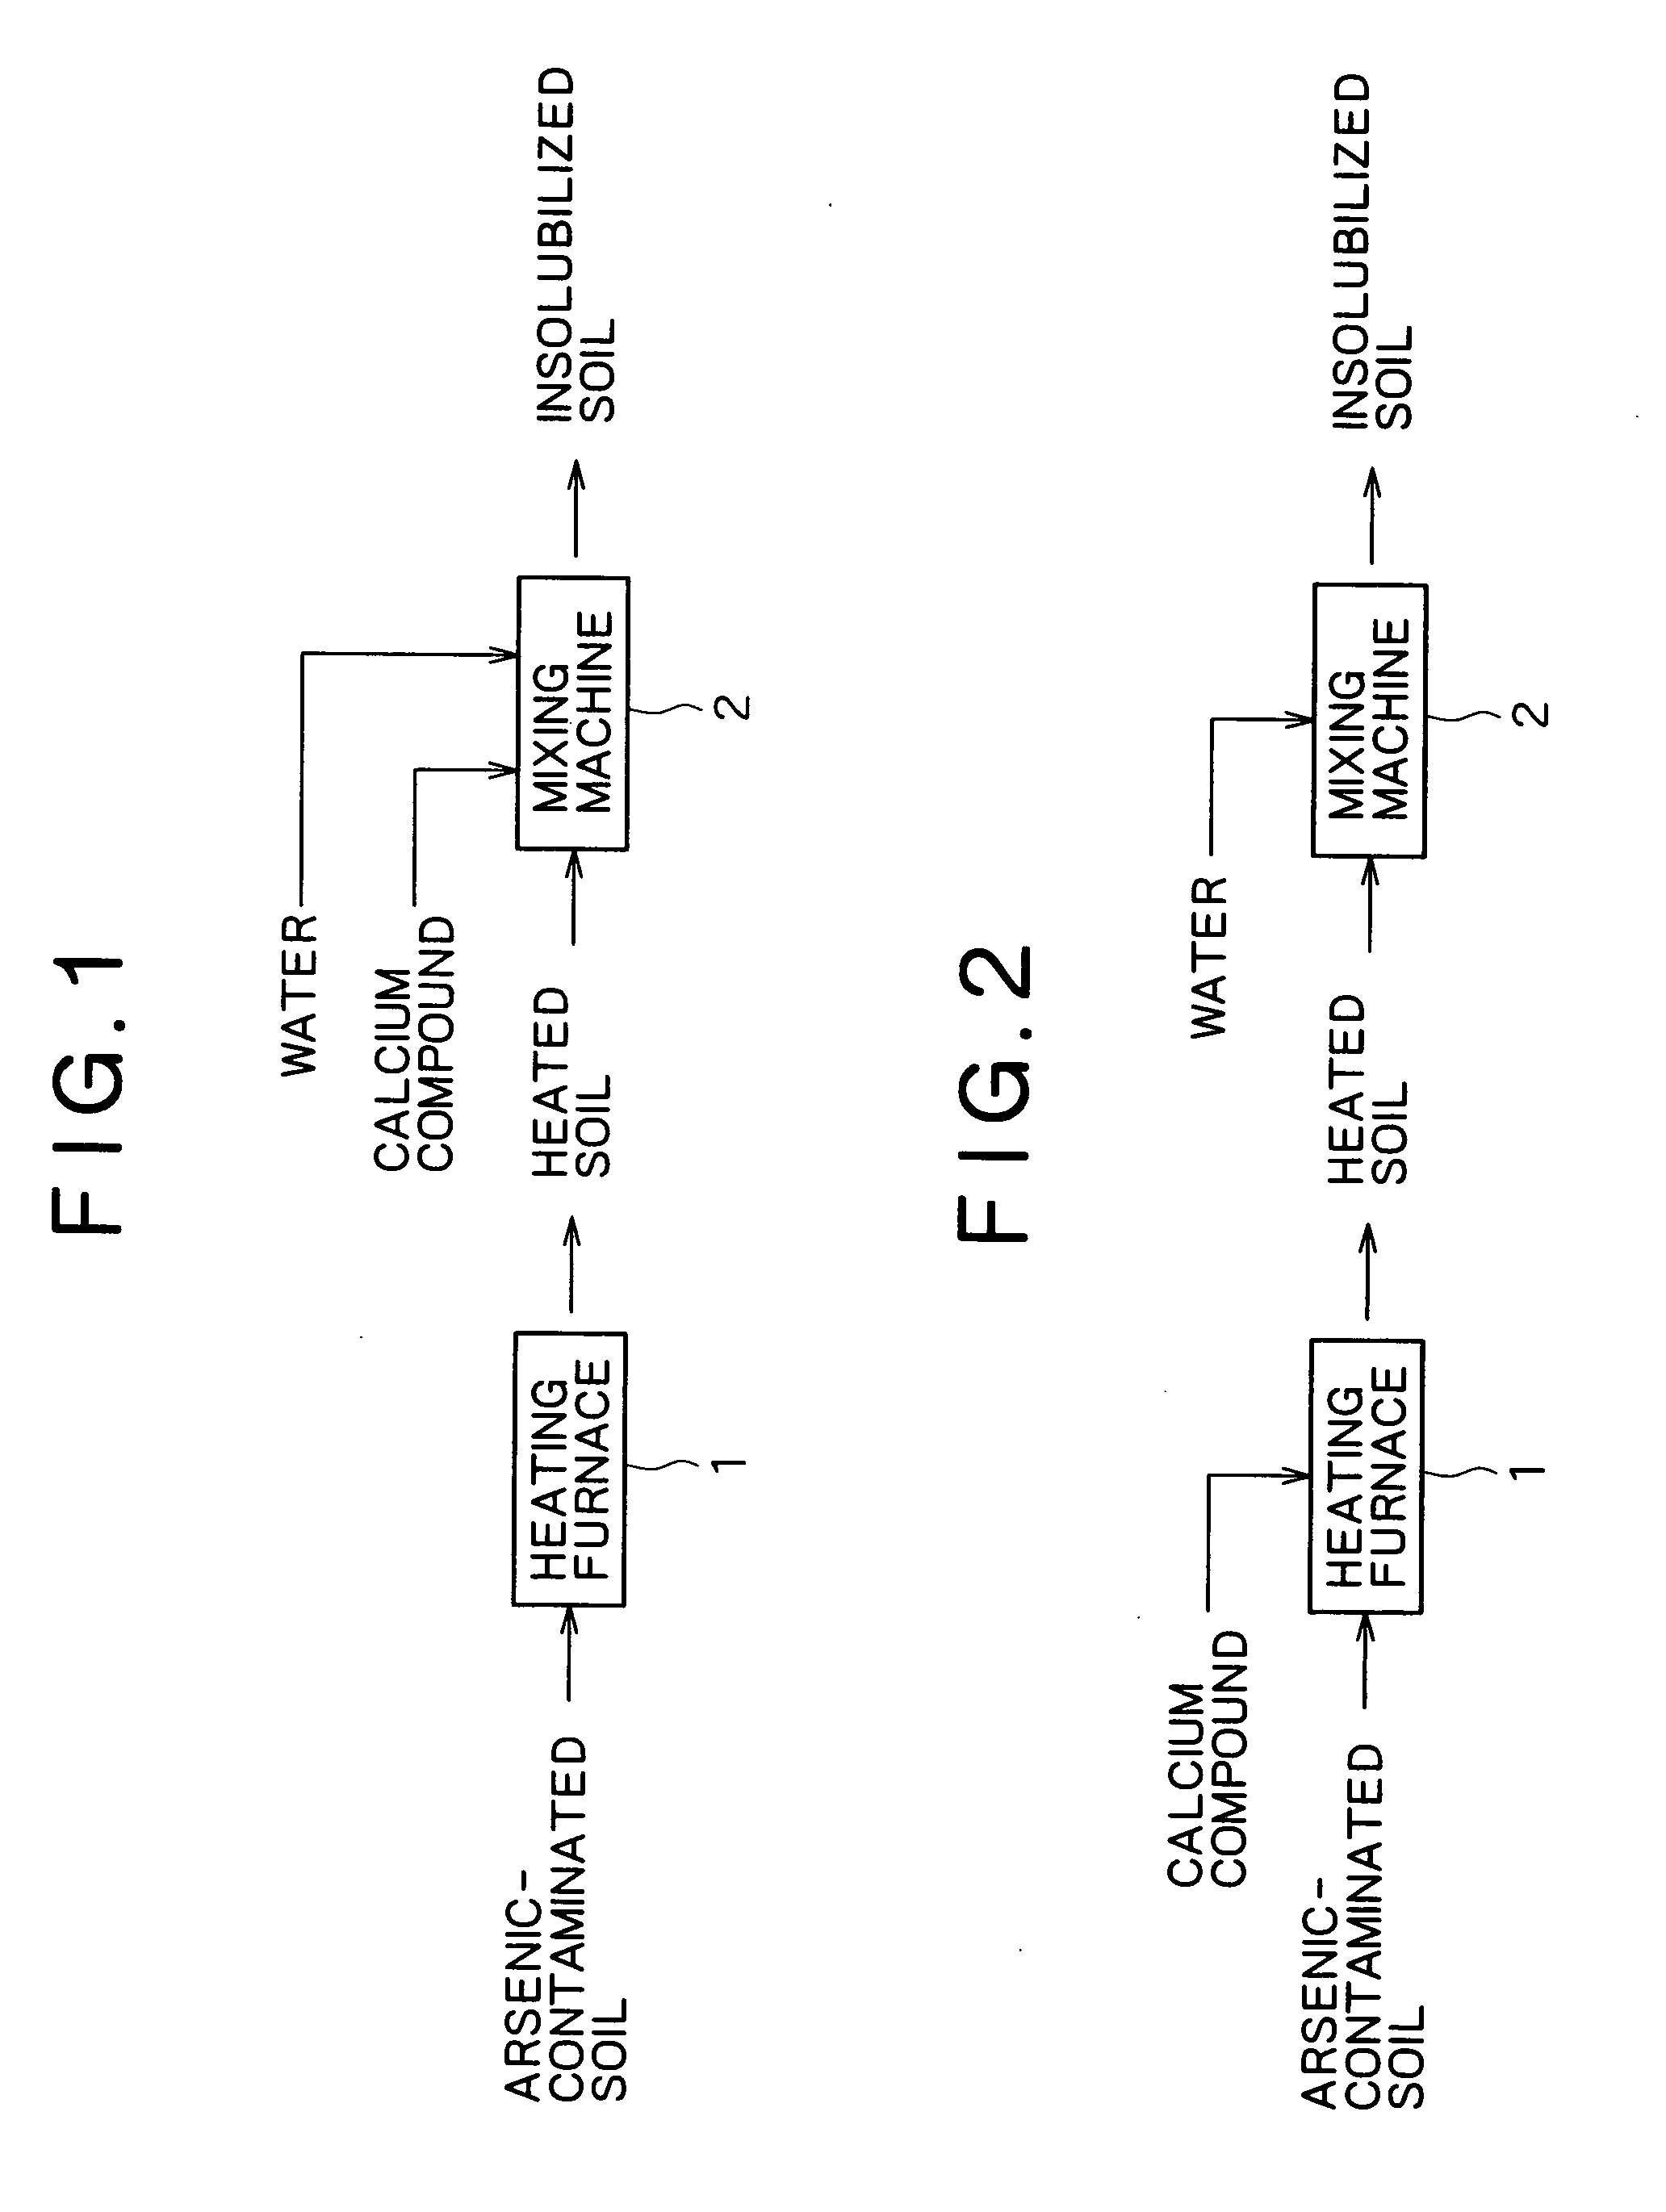 Method for treatment of arsenic-contaminated soil